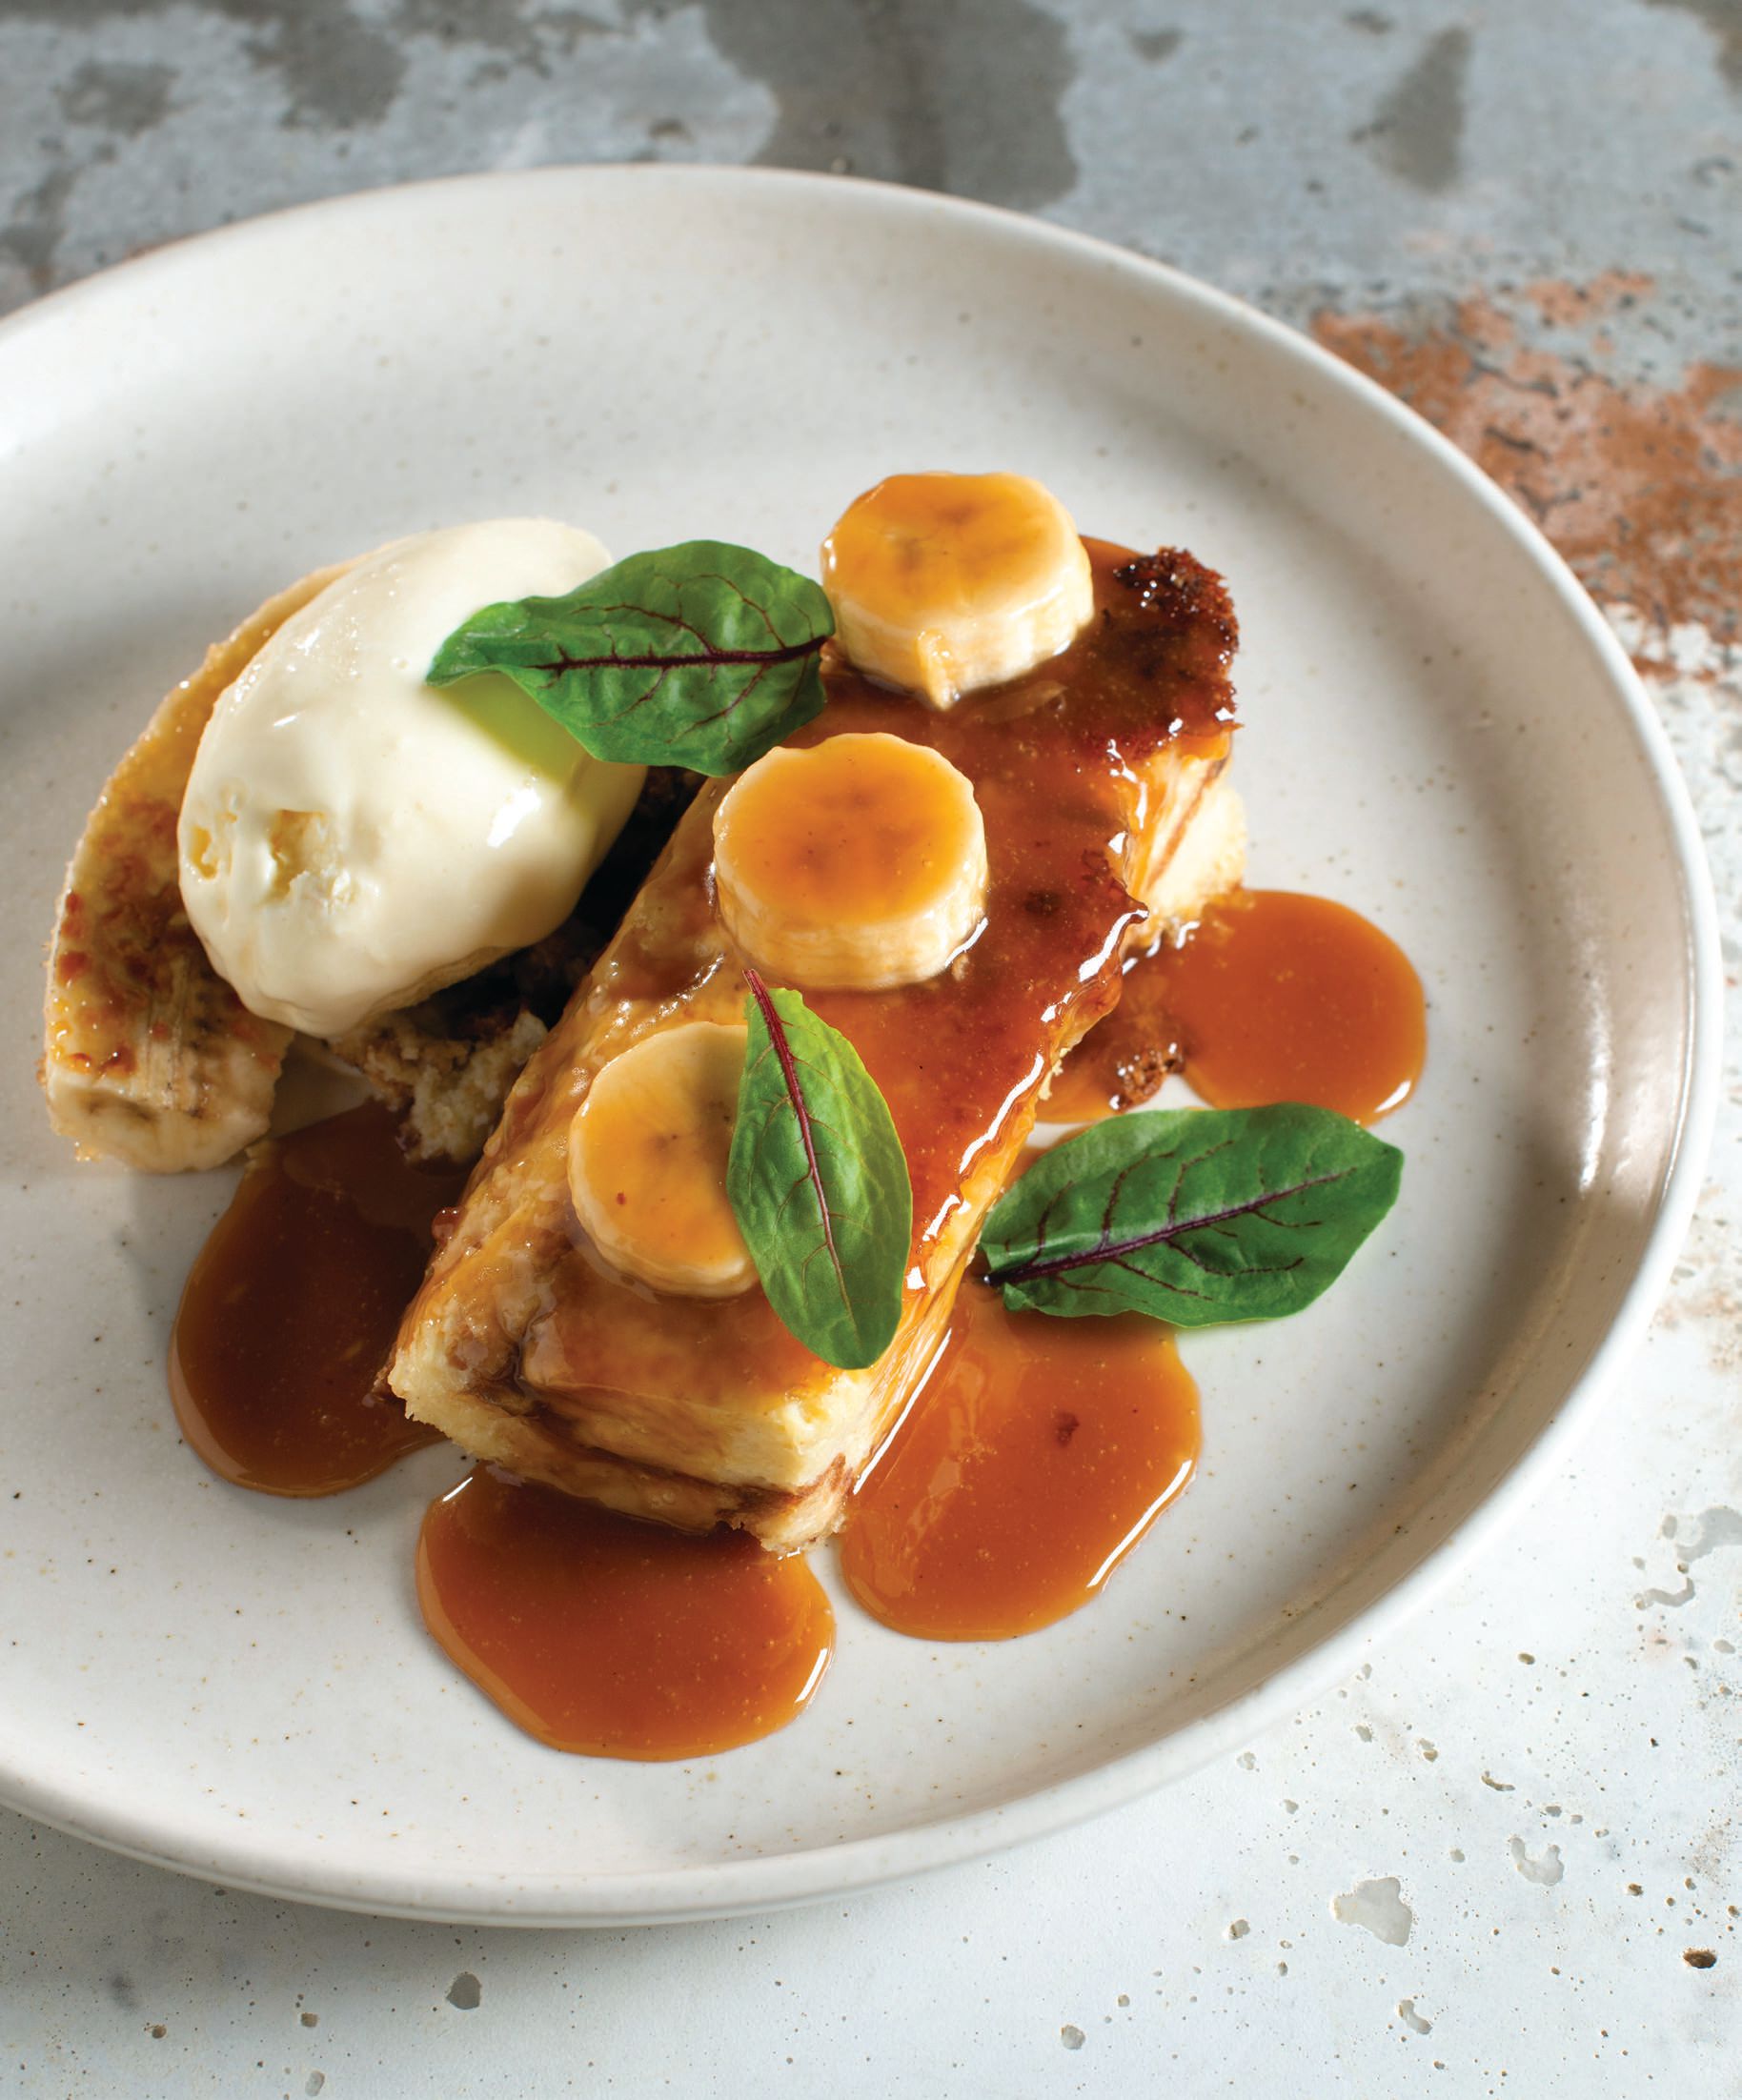 The Nutella bread pudding features bruleed bananas, vanilla gelato and caramel sauce. PHOTO COURTESY OF OUTSHINE PR